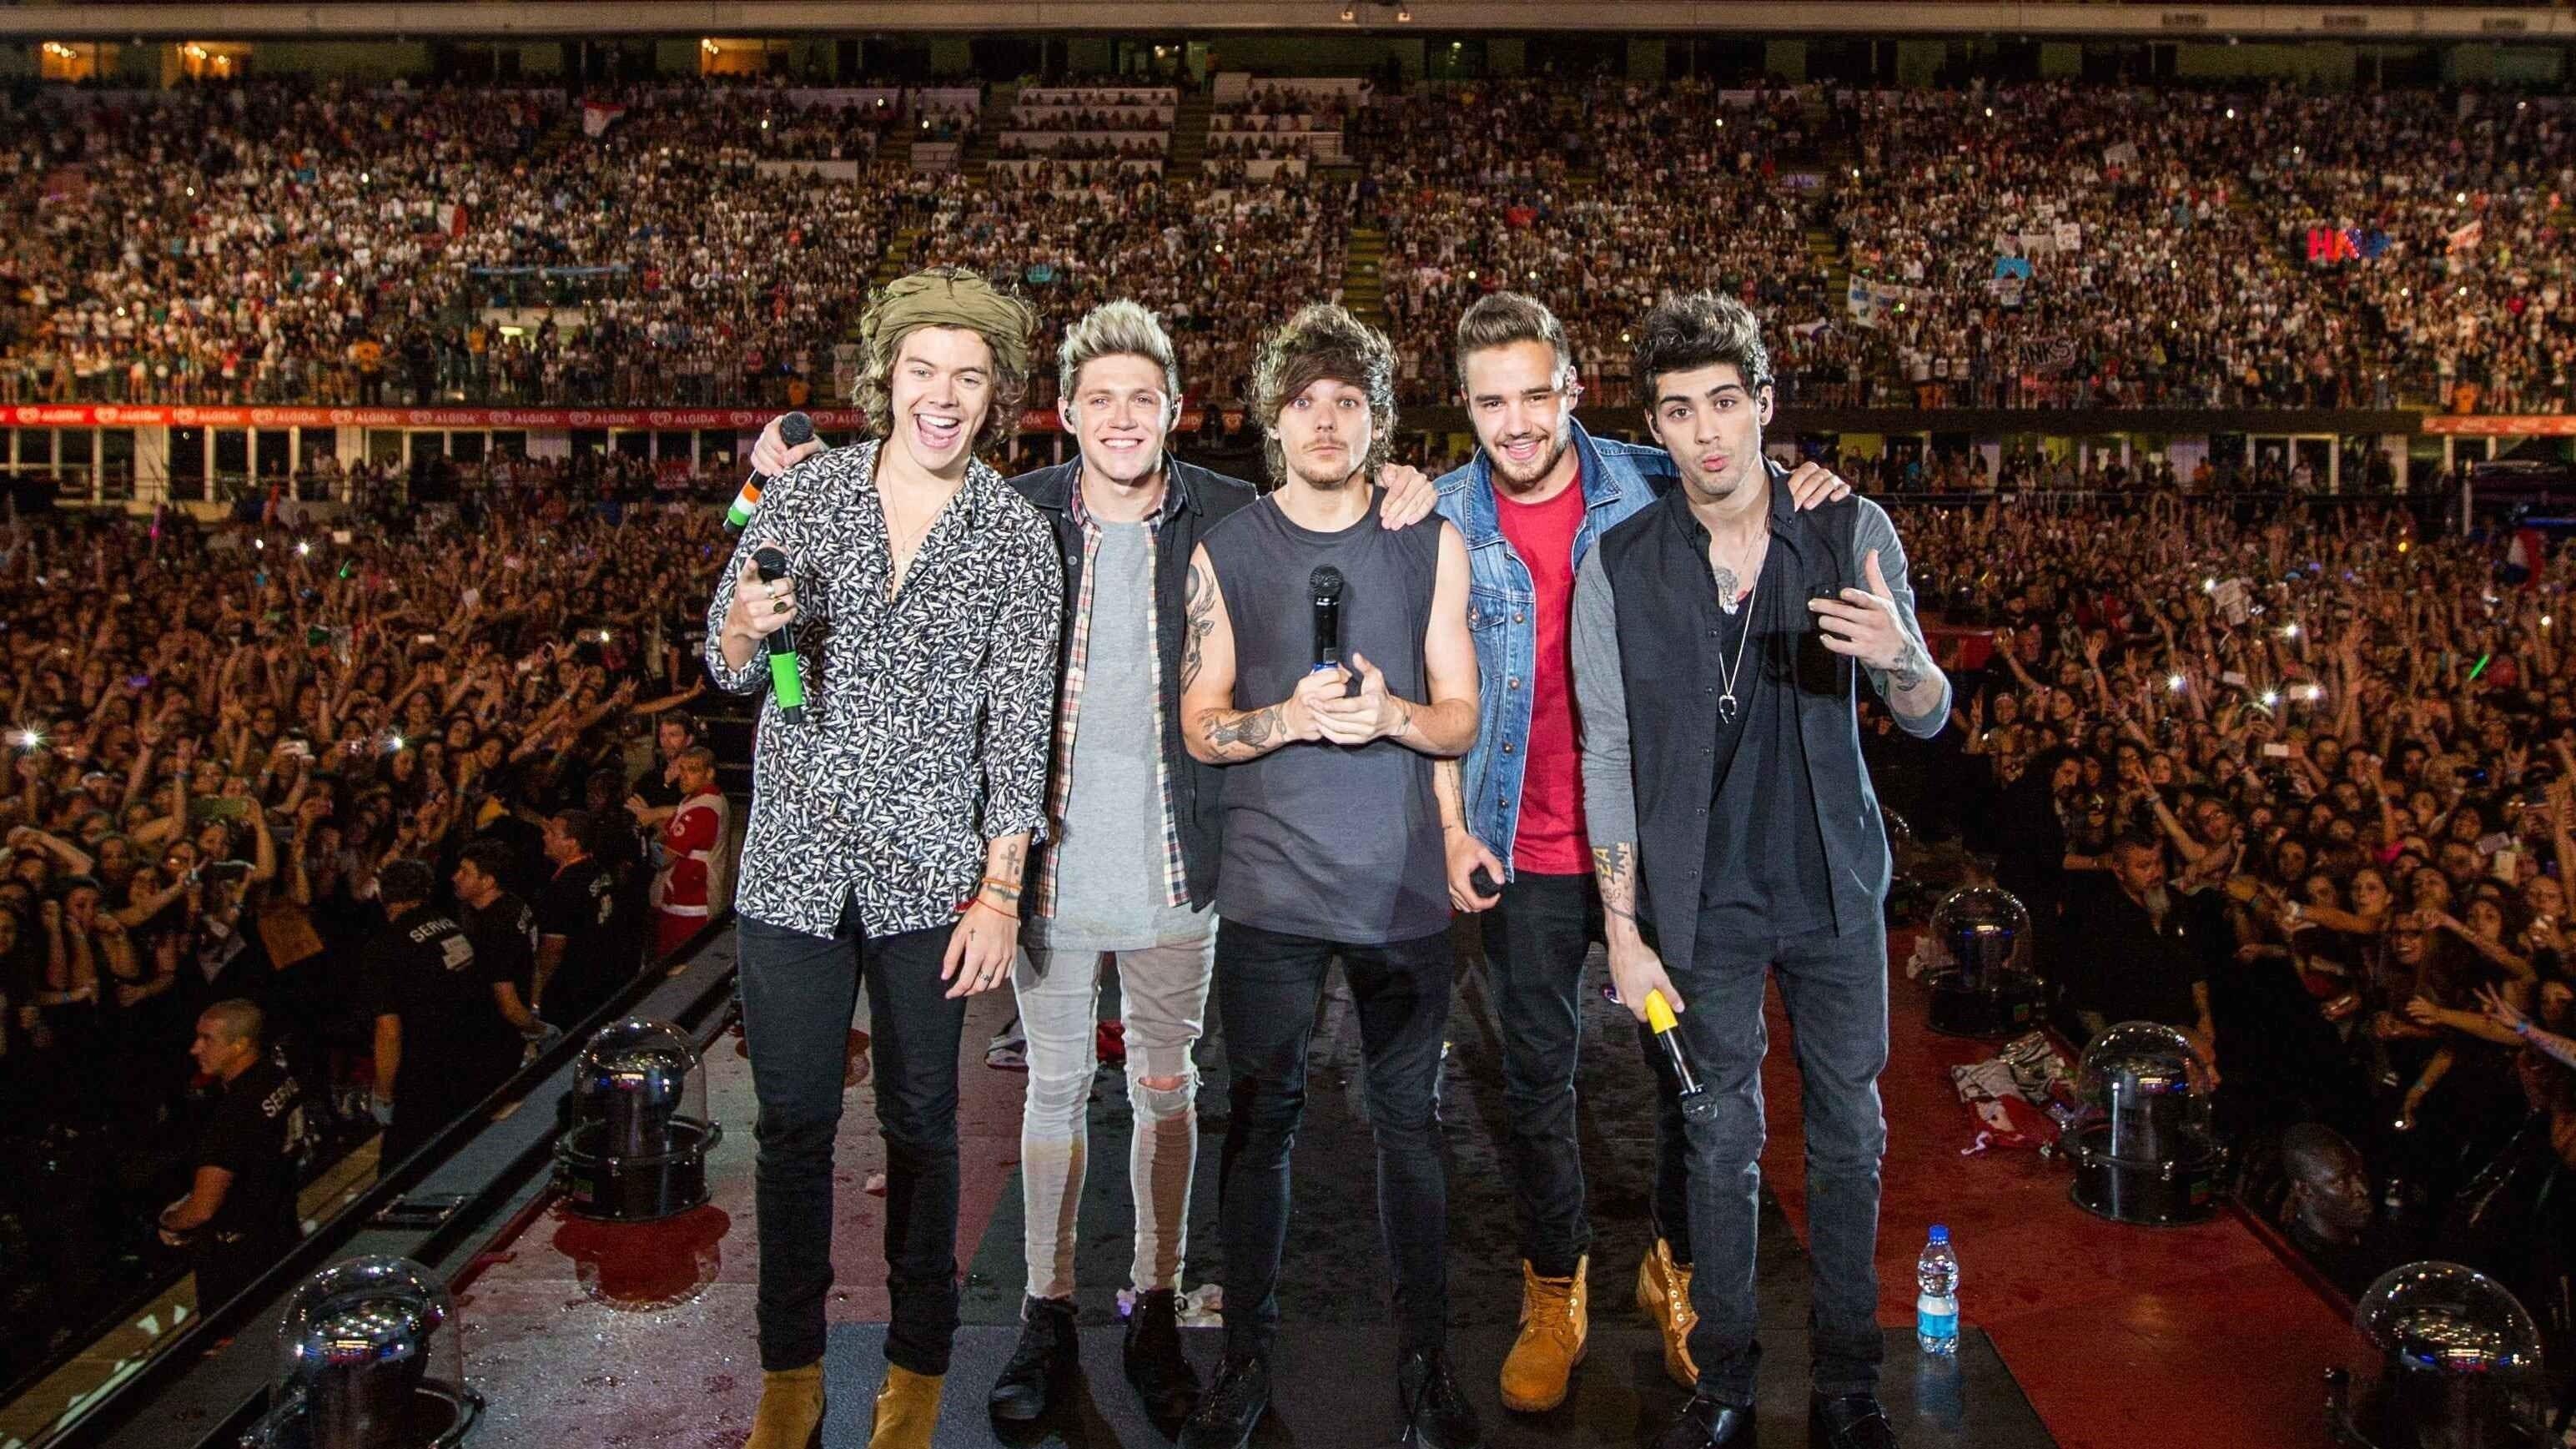 One Direction: Where We Are - The Concert Film backdrop